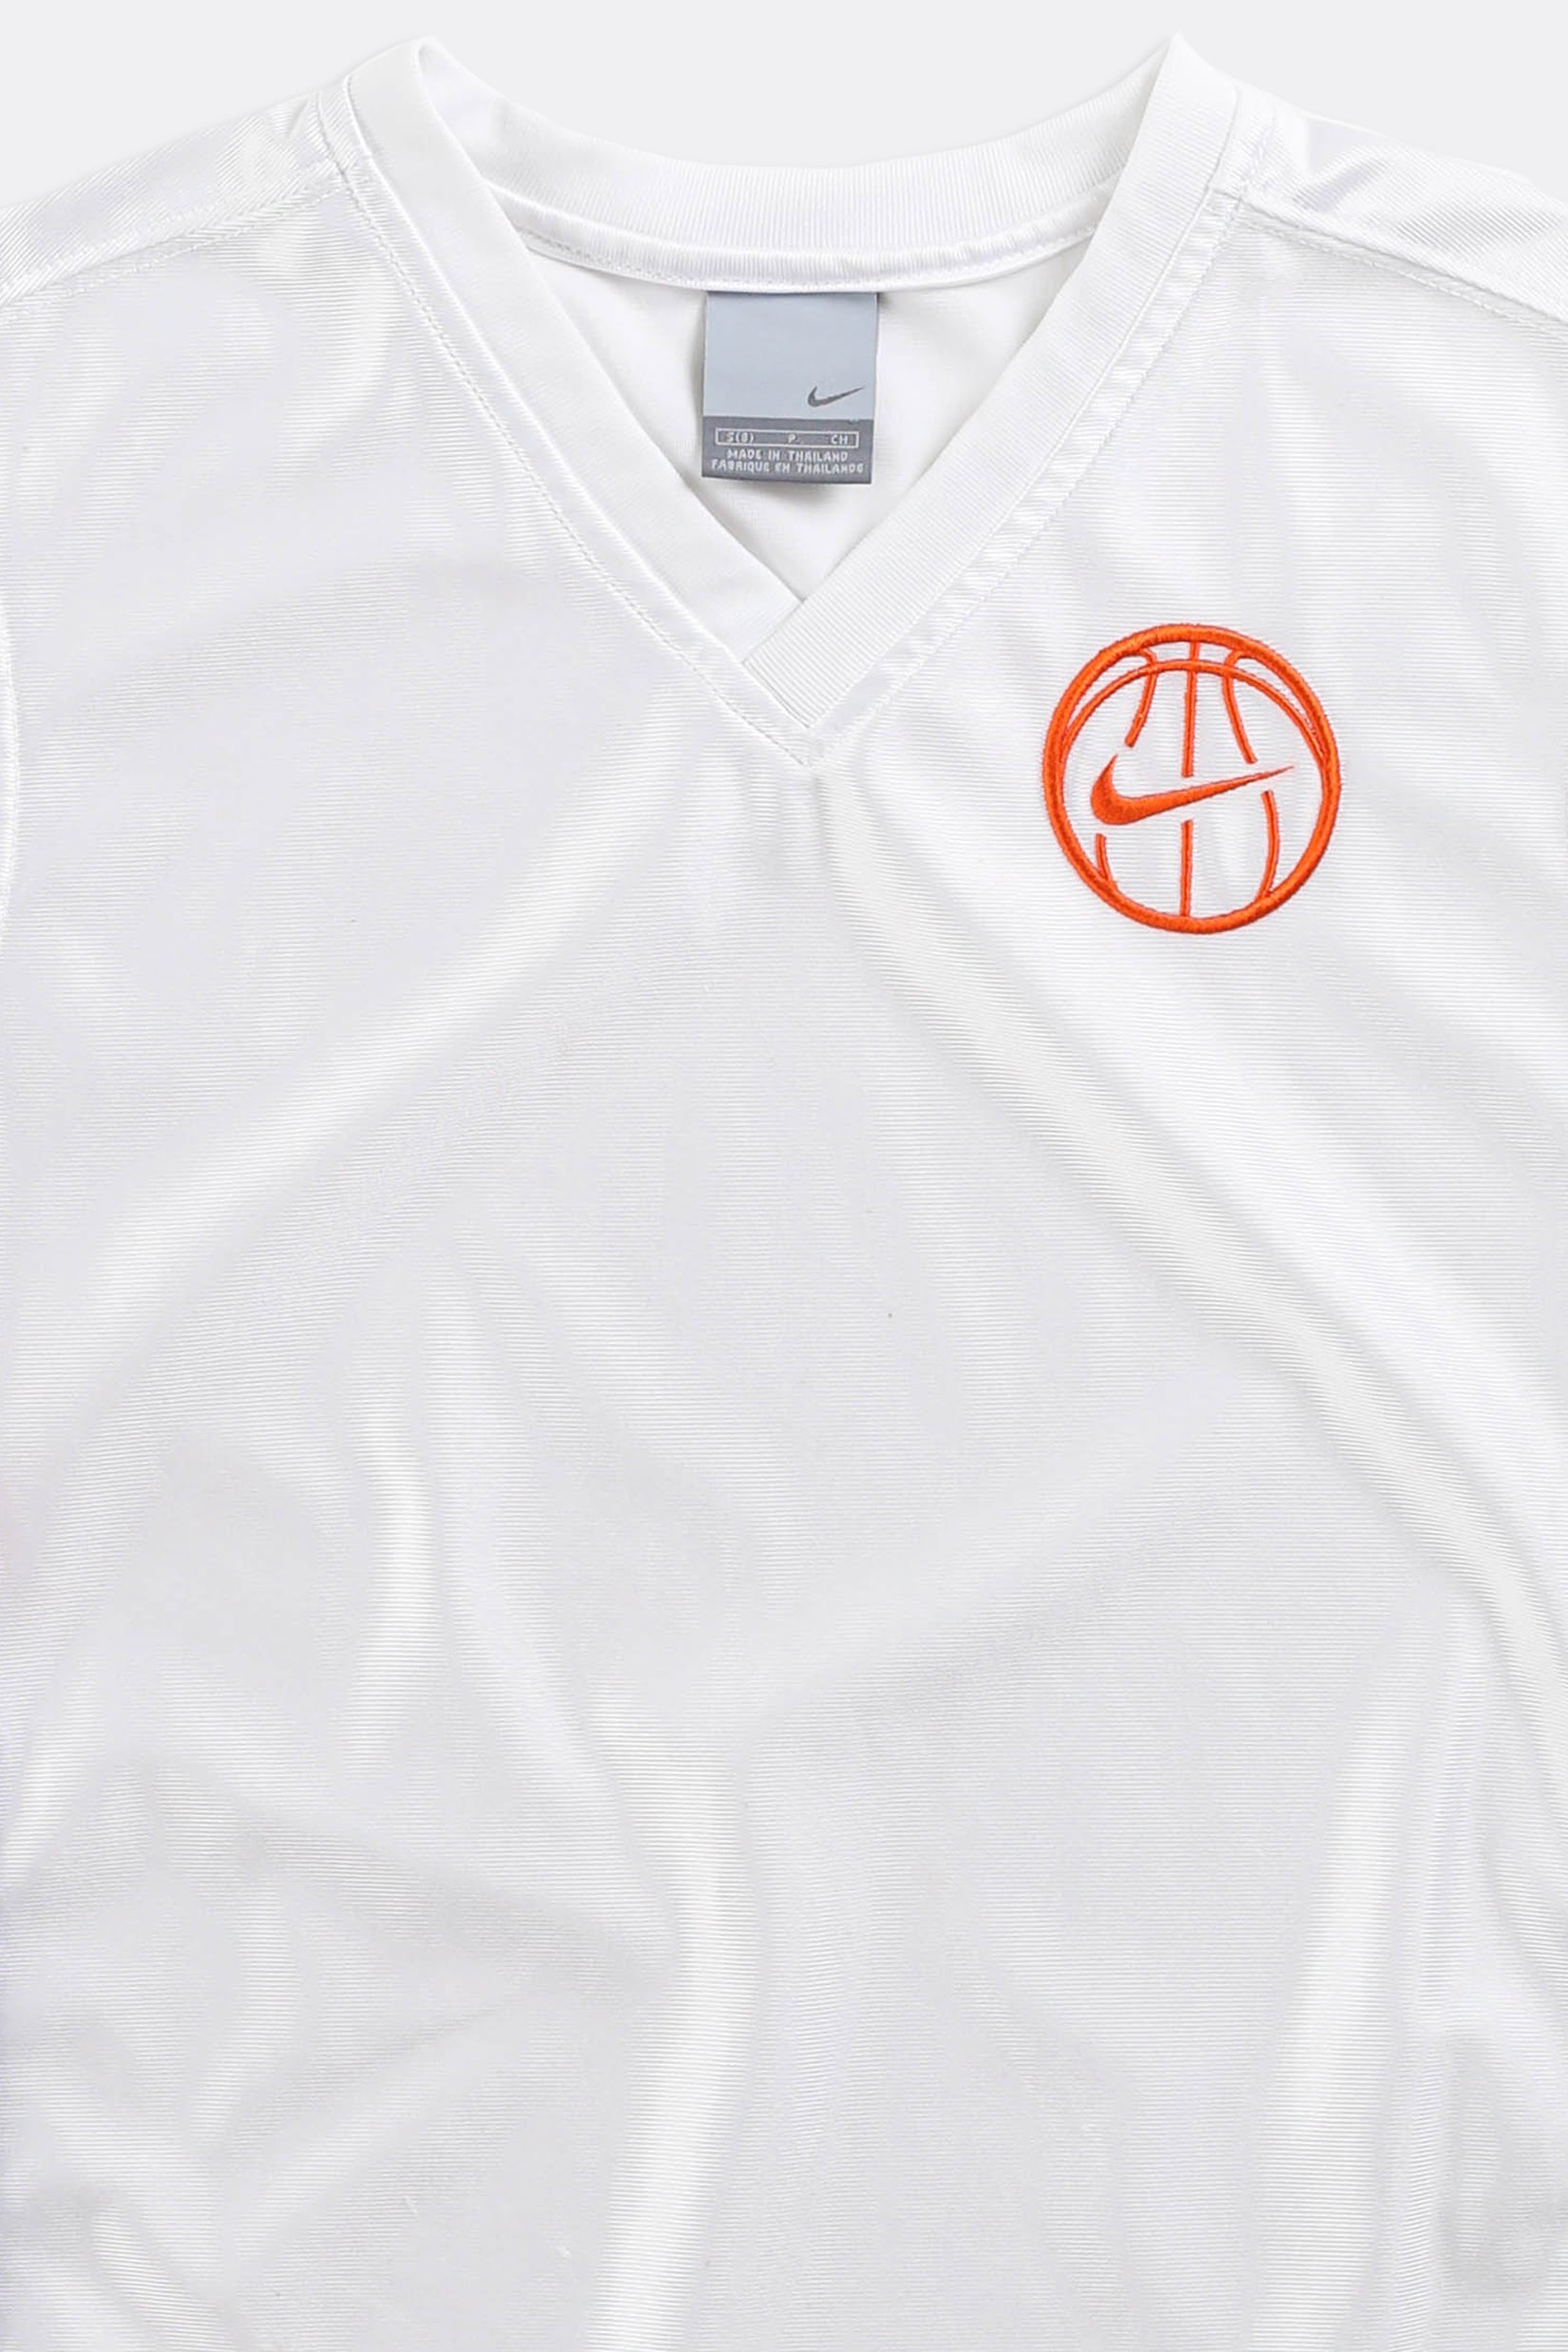 Vintage Clippers NBA Jersey – Frankie Collective